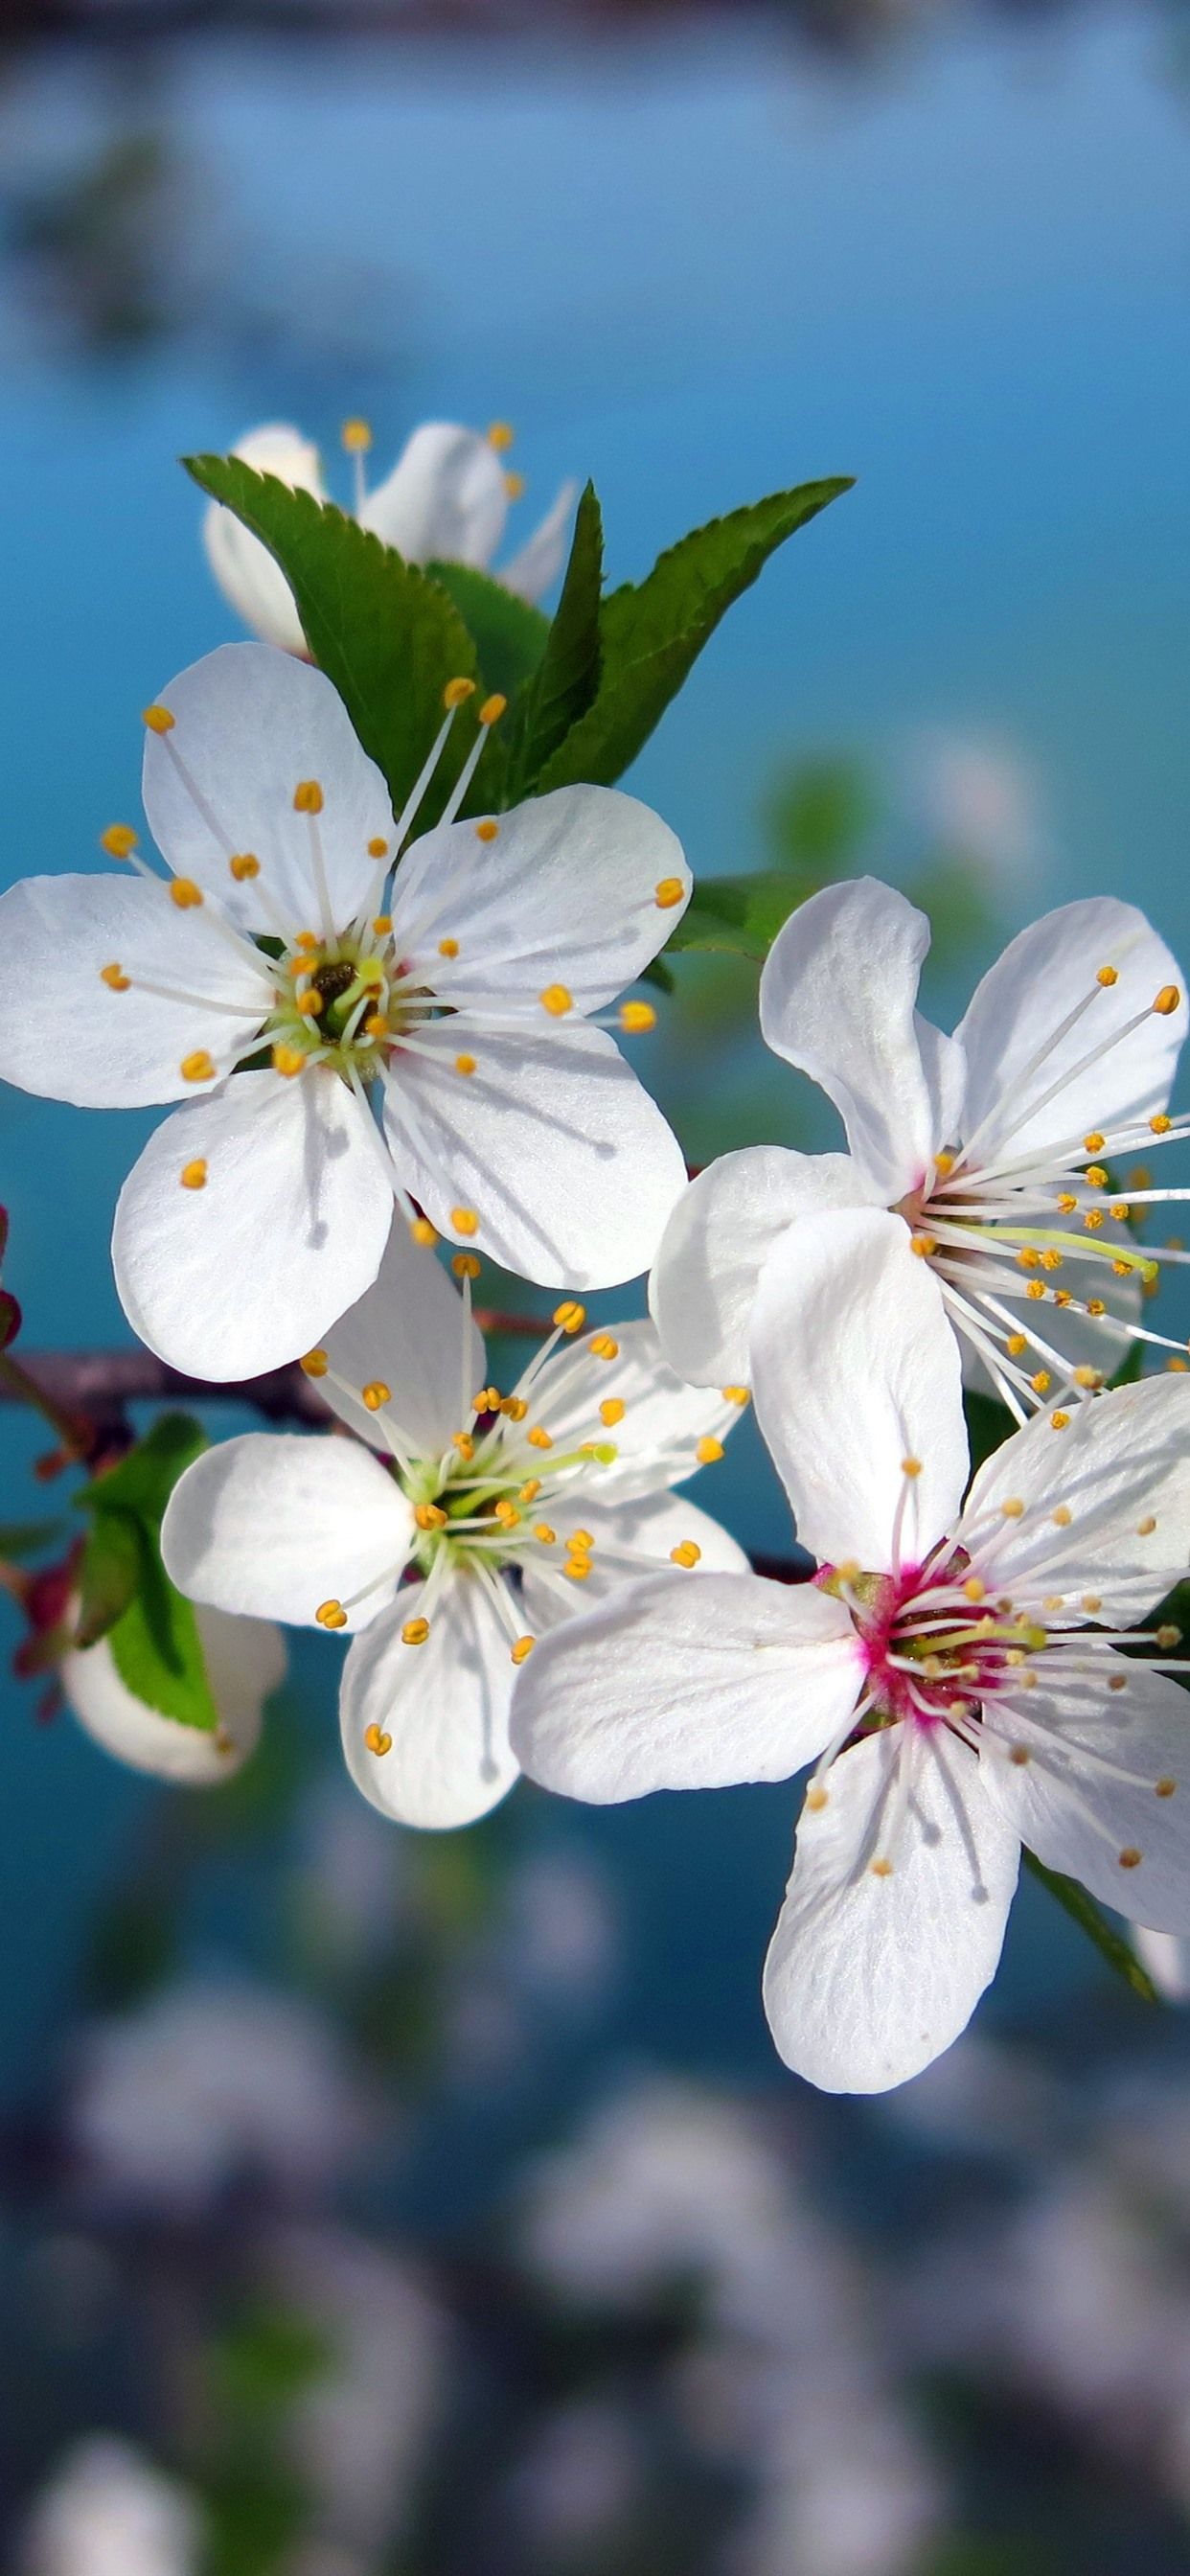 White Cherry Flowers Bloom, Spring 1242x2688 IPhone 11 Pro XS Max Wallpaper, Background, Picture, Image